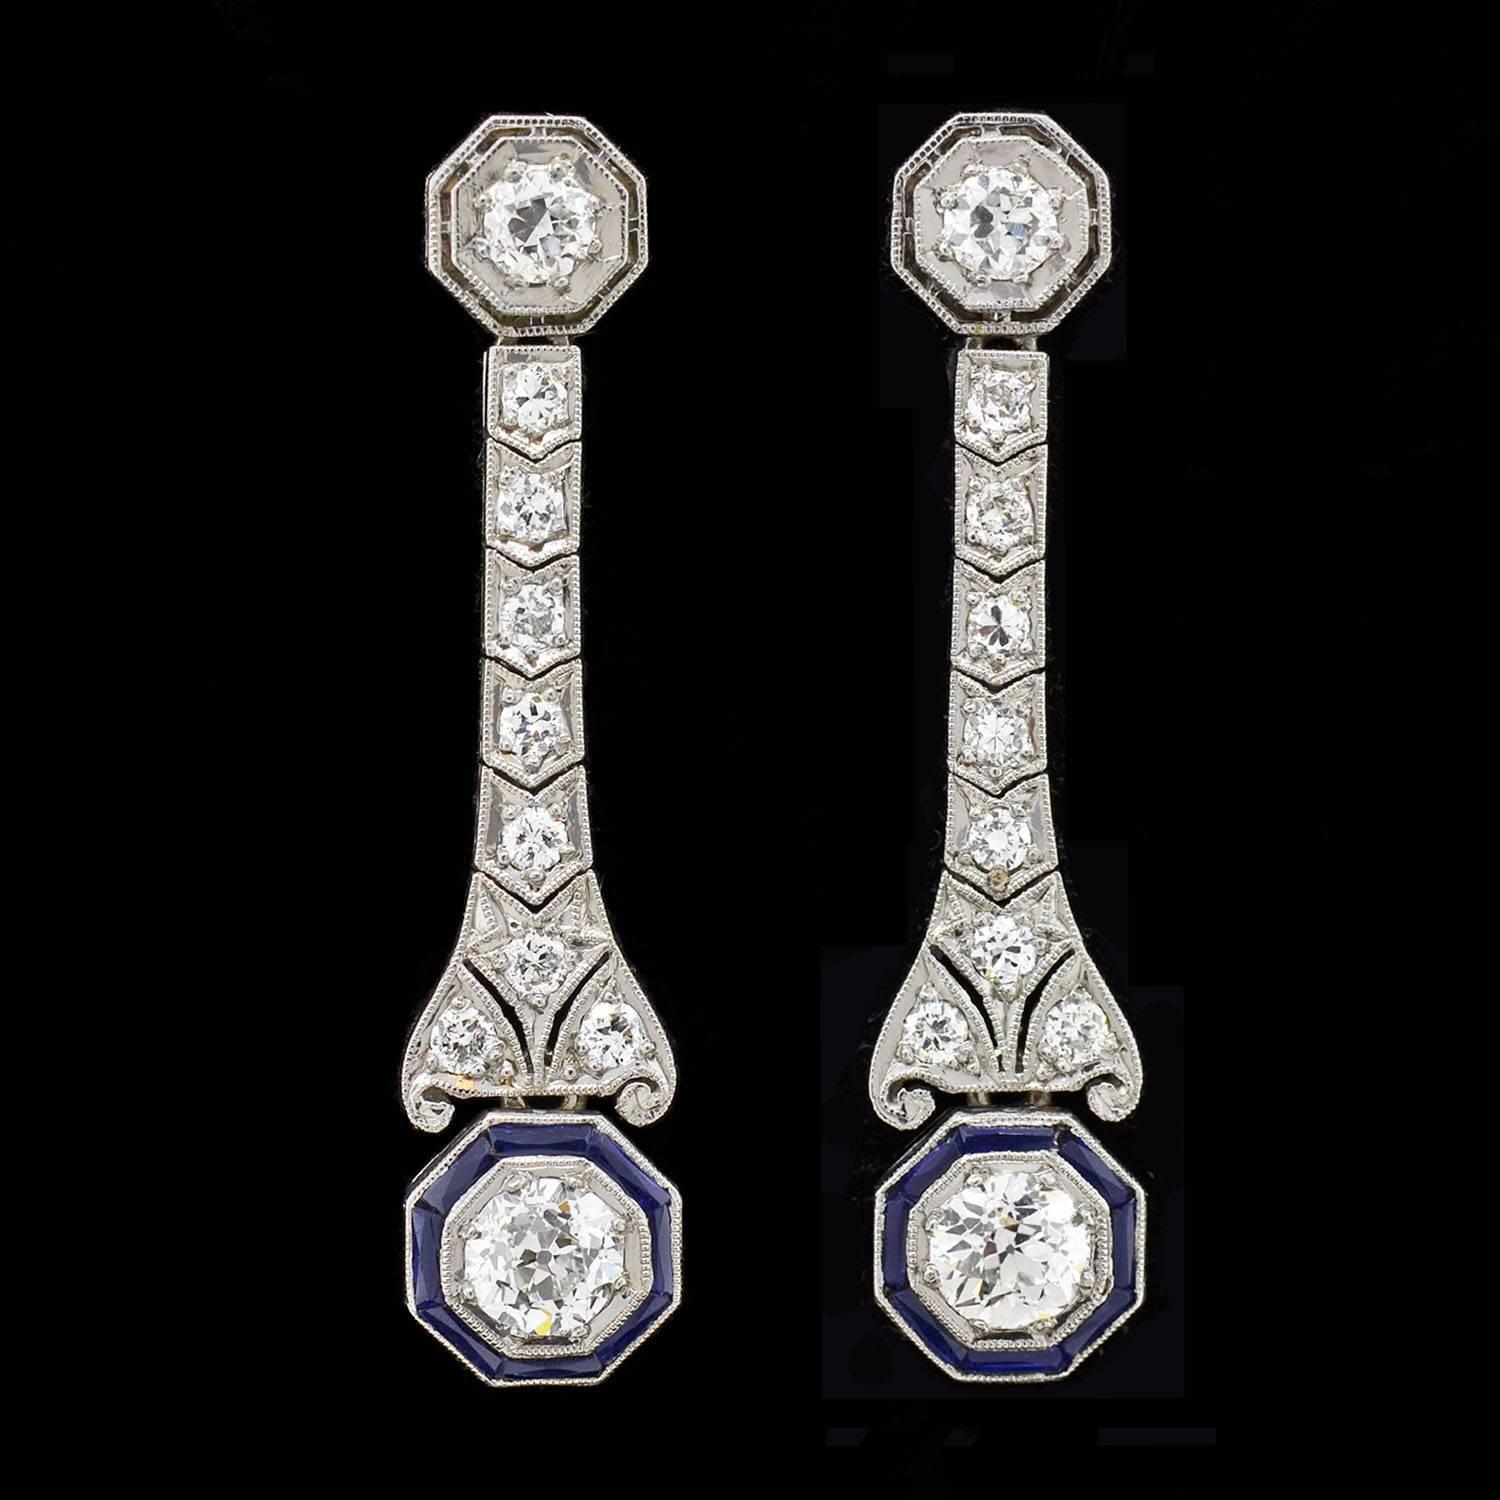 Absolutely exquisite diamond and sapphire earrings from the Art Deco (ca1920) era! Each gorgeous earring is made of platinum and begins with a single diamond surmount. The diamond is set within an octagonal-shaped mounting that displays cutouts and